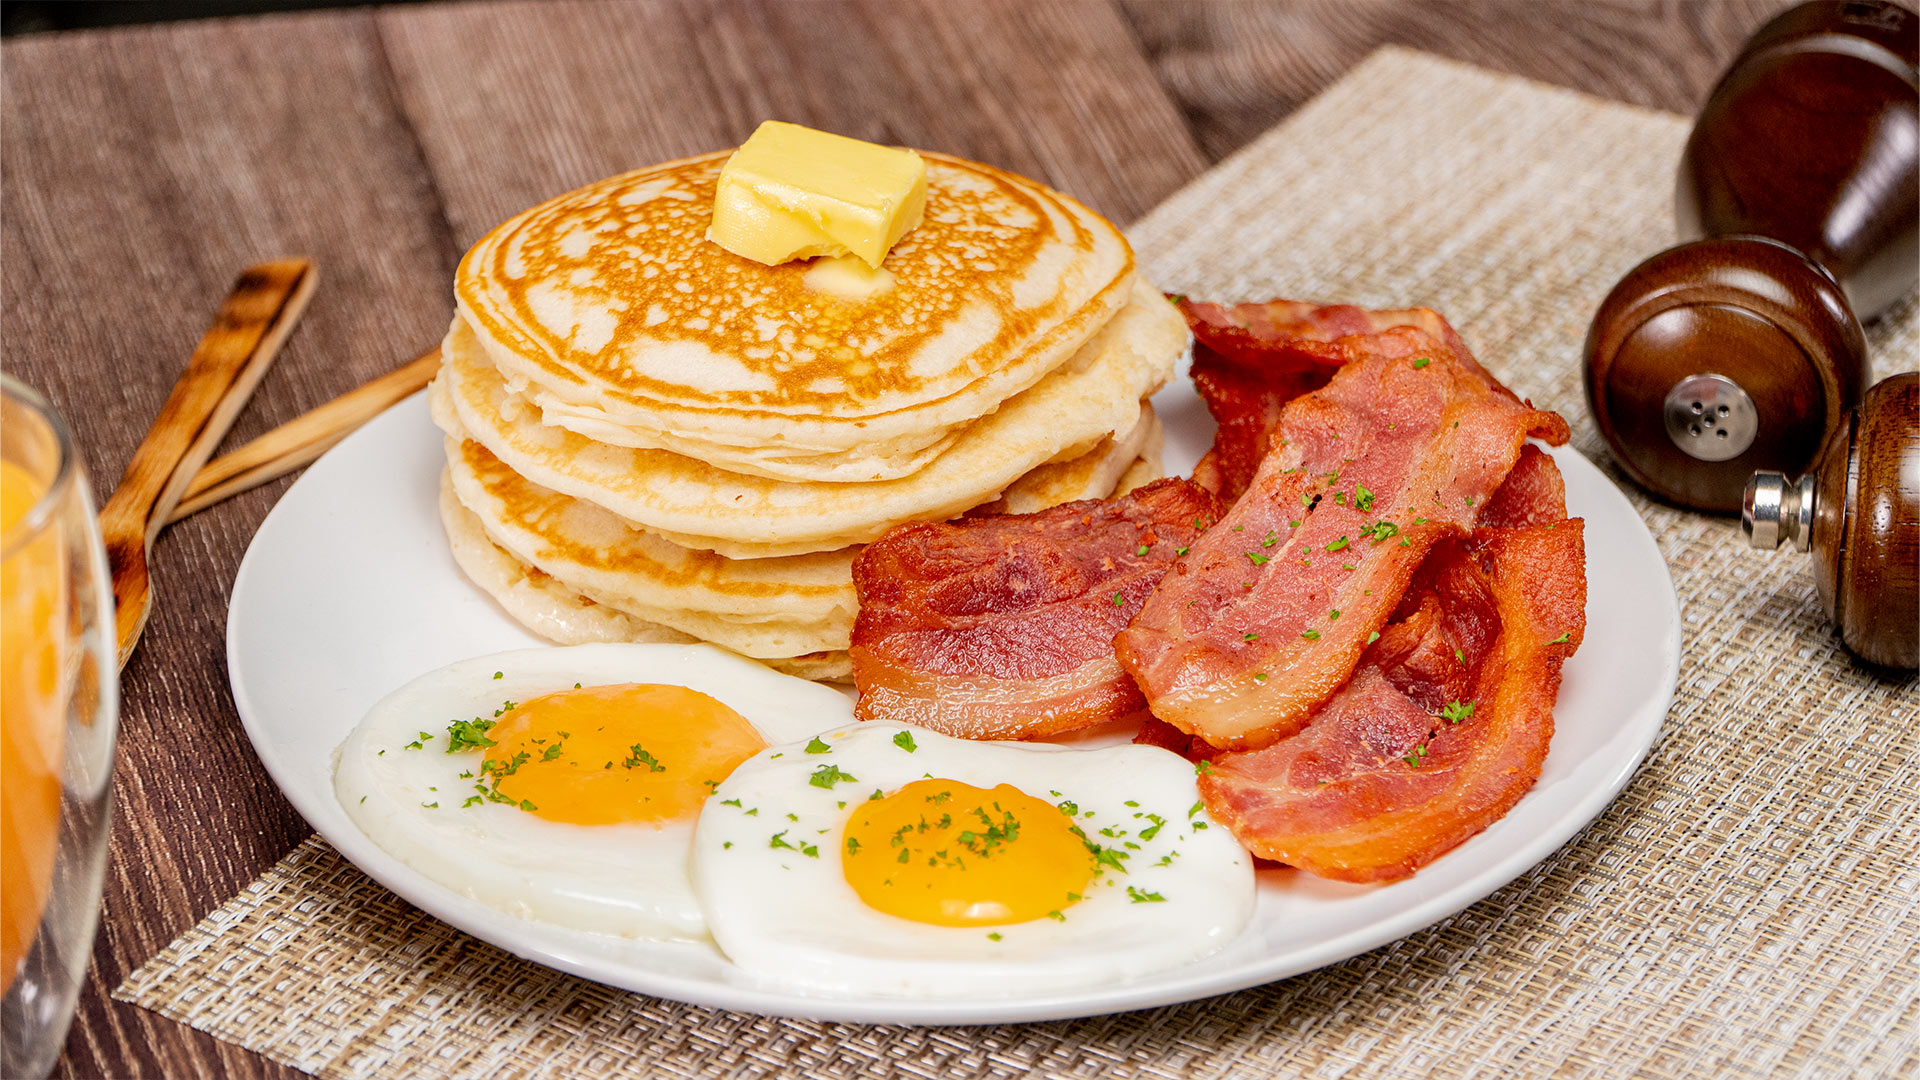 classic-sunny-side-up-eggs-with-bacon-and-pancakes-recipes